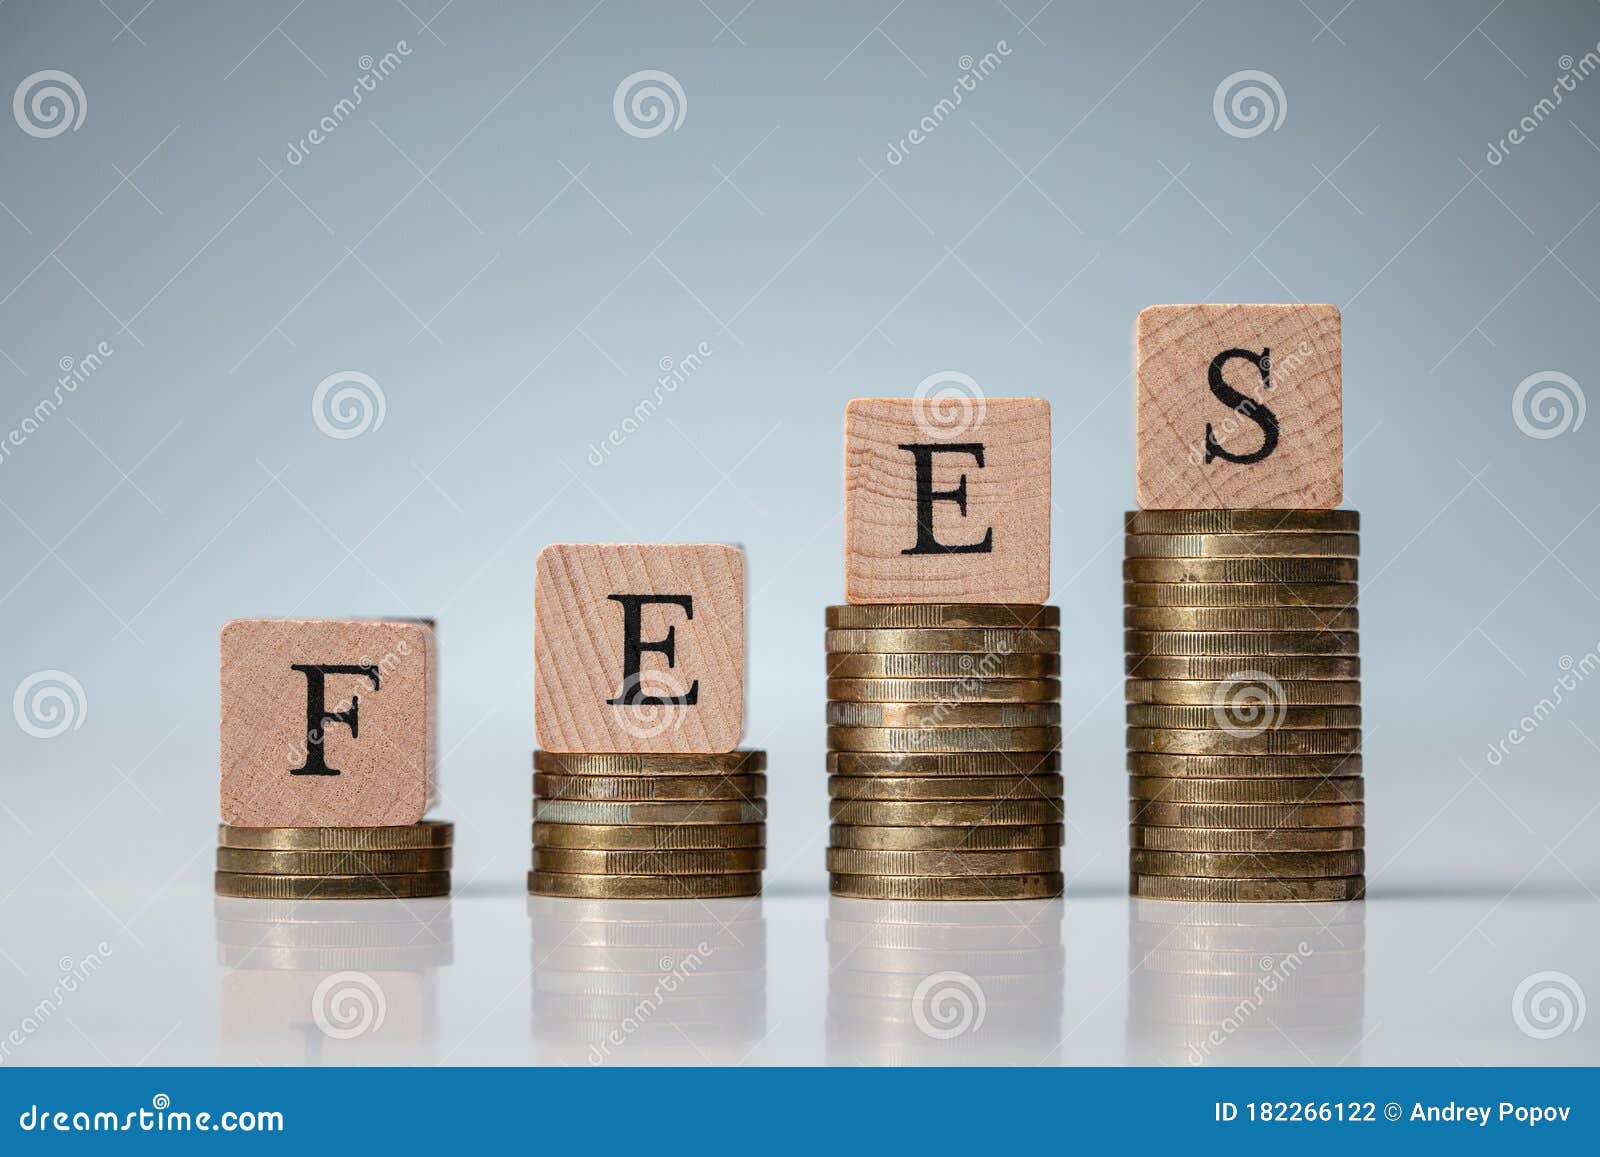 Fees On Increasing Coins Stacks Stock Photo - Image of ...